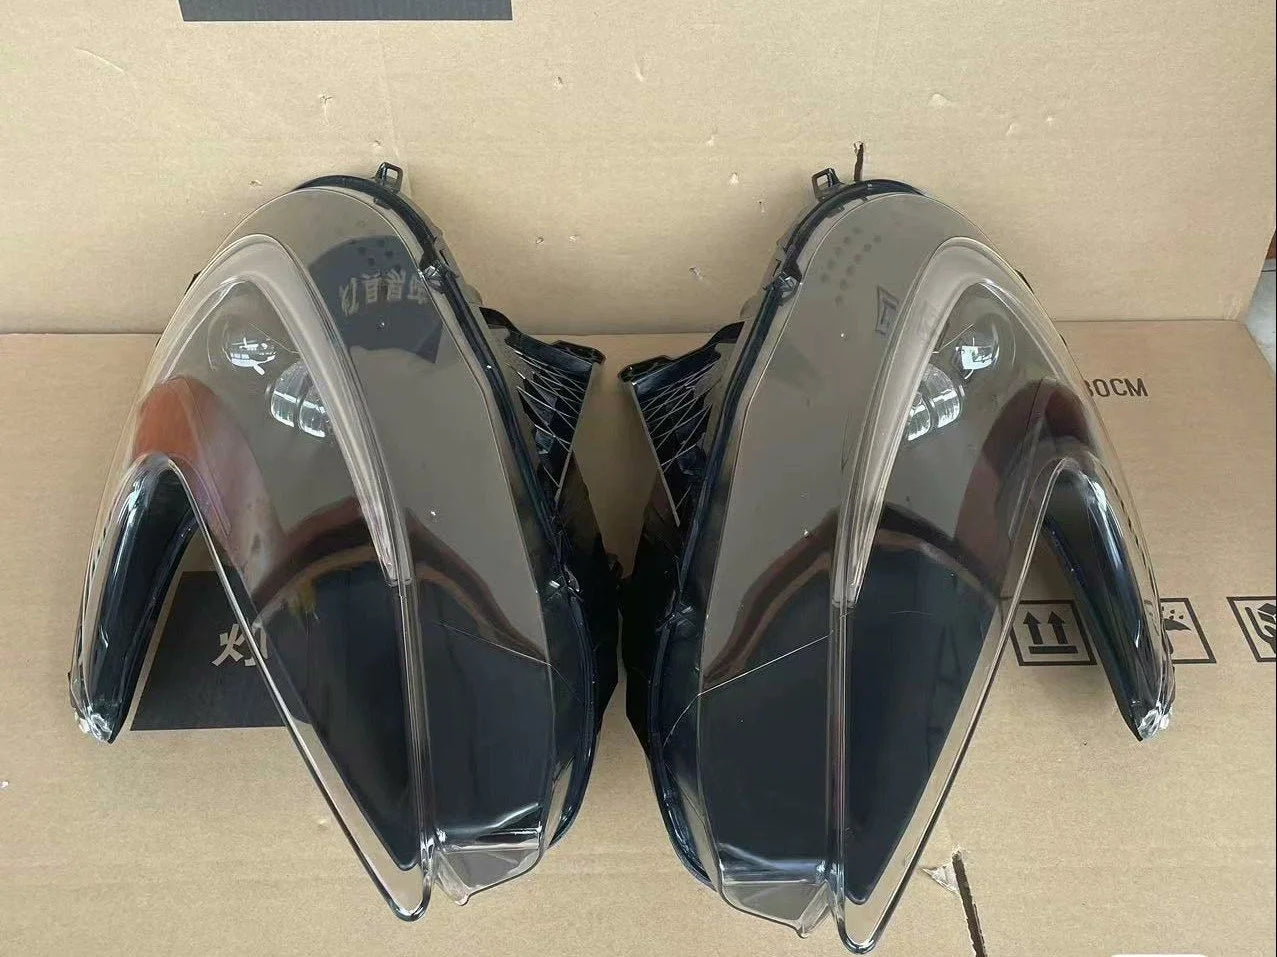 OEM 650S Headlights (works for MP4-12C Conversion)